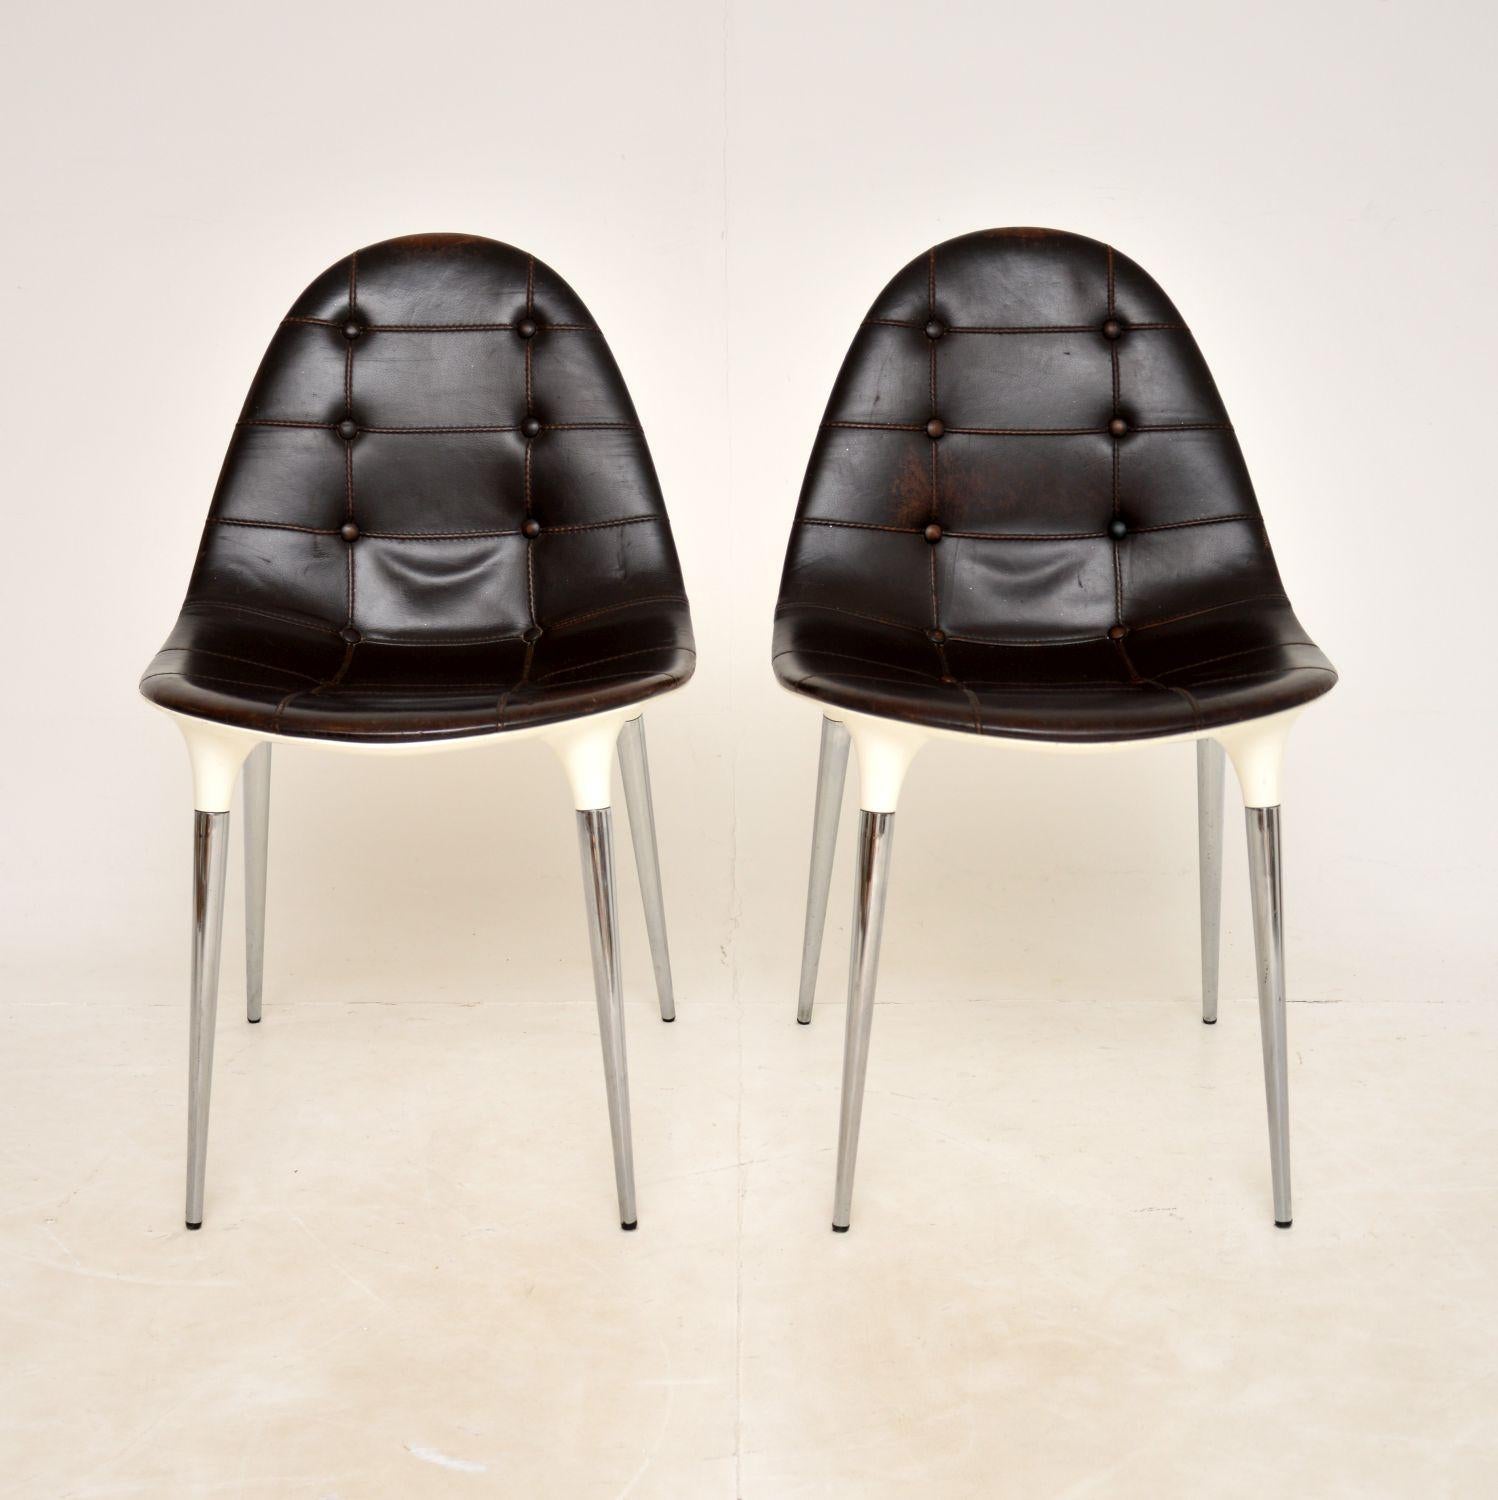 A stunning pair of modernist chairs with a retro / space age feel. This model is called the Caprice chair, they were designed by Philippe Starck in 2007 and made in Italy by Cassina.

They seat on chrome plated steel legs, with white nylon shell